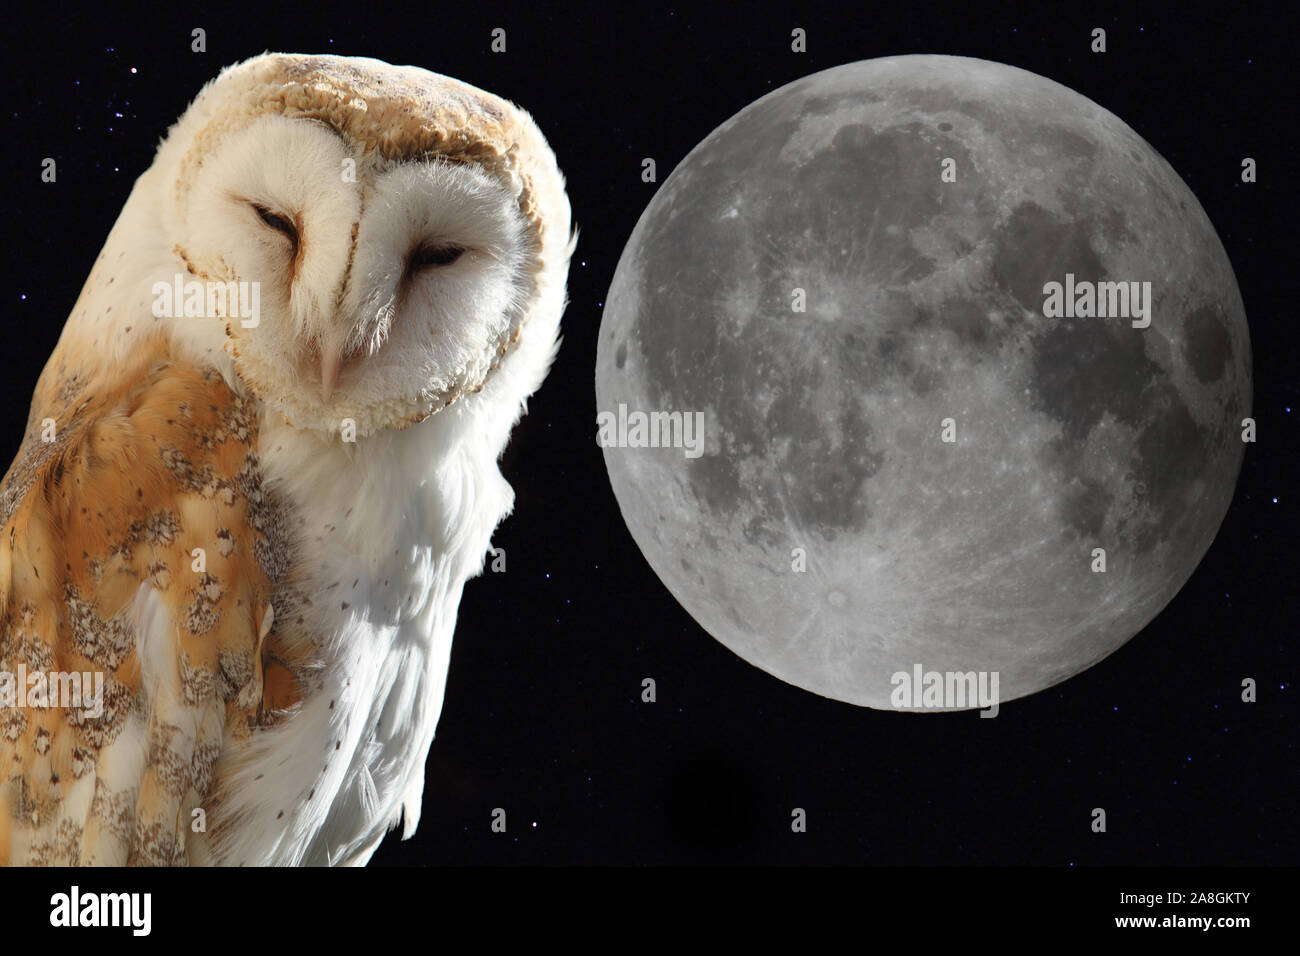 the barn owl with the moon in the night sky background Stock Photo